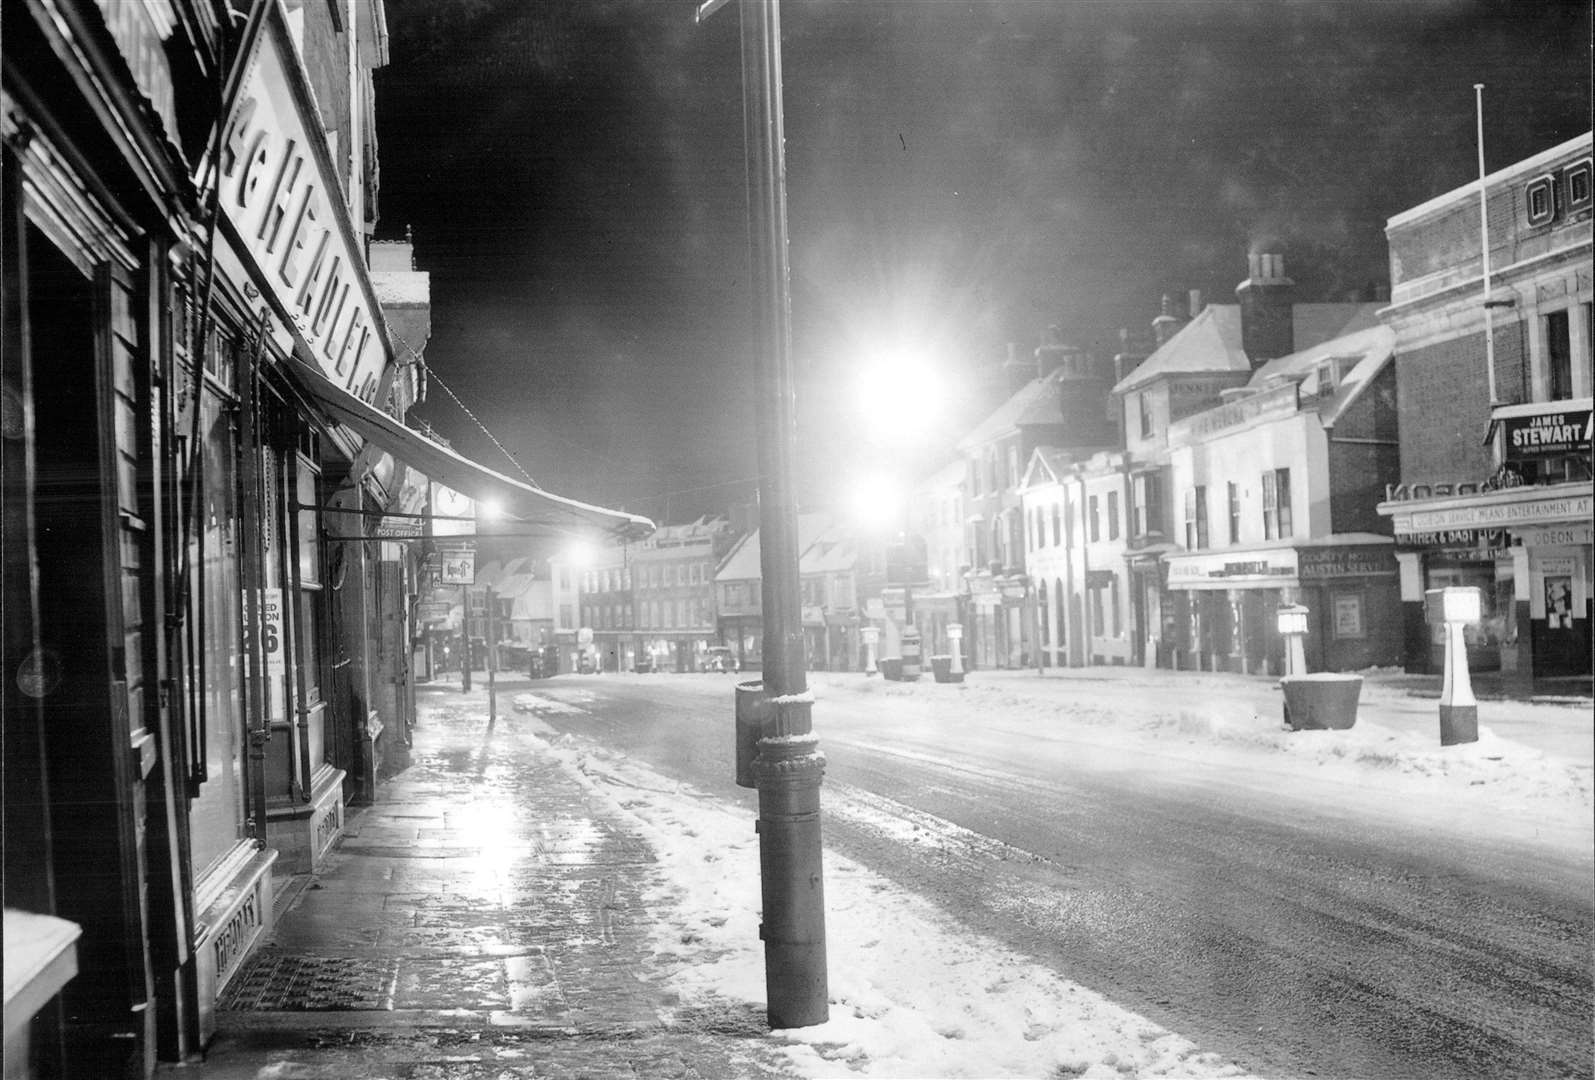 A snowy Lower High Street in December 1959 showing the Odeon on the right